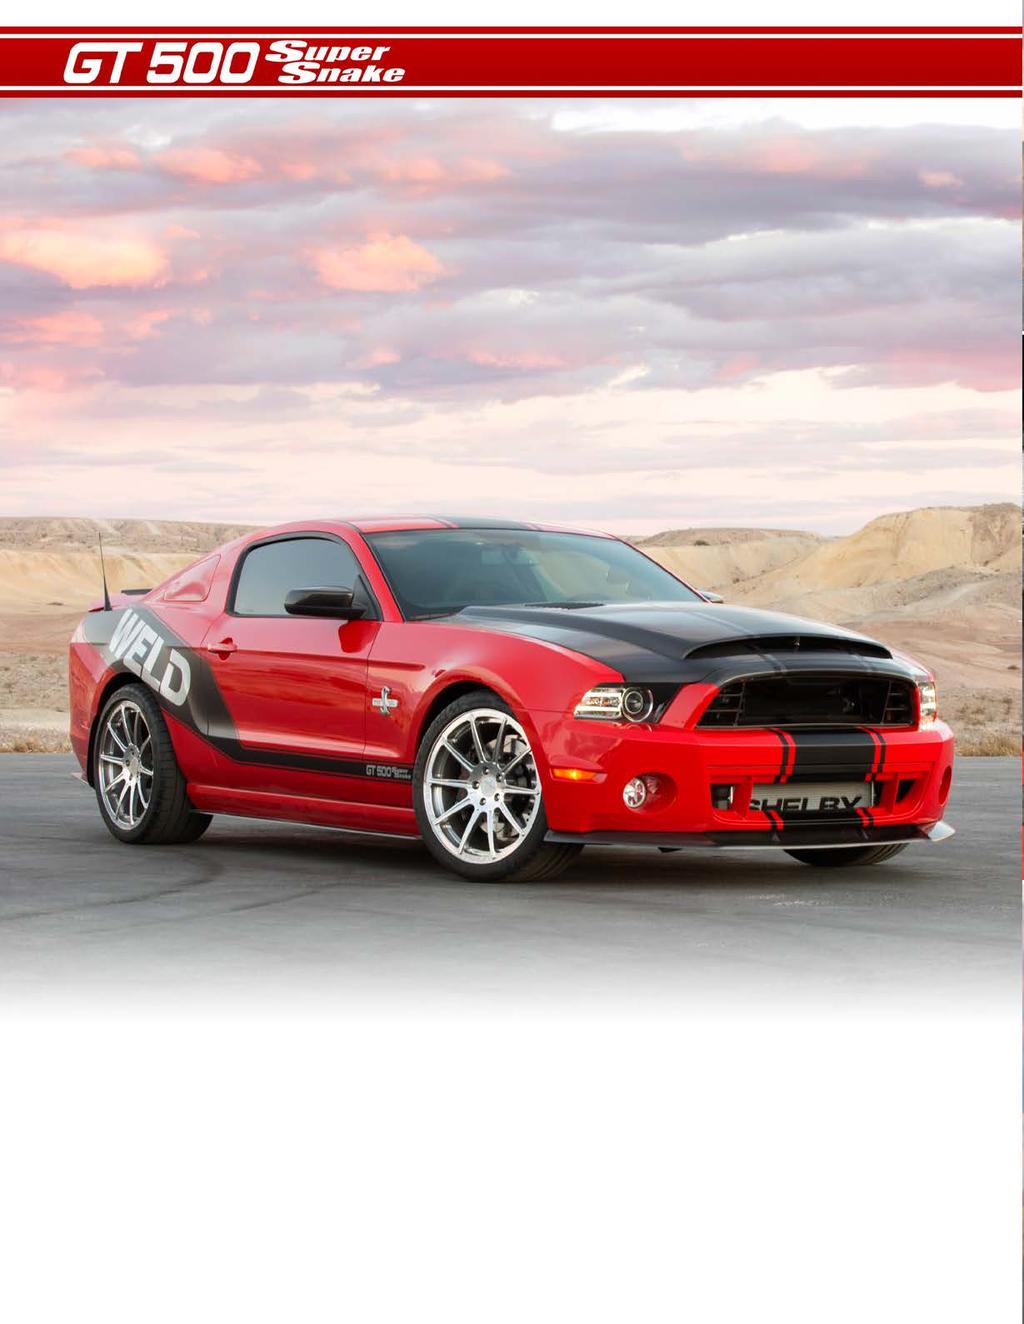 2013 Super Snake Weld Edition CSM - 13SS0009 Asking Price - $200,000 This car was designed to feature the new wheels designed specifically and exclusively for Shelby and will be used on the next